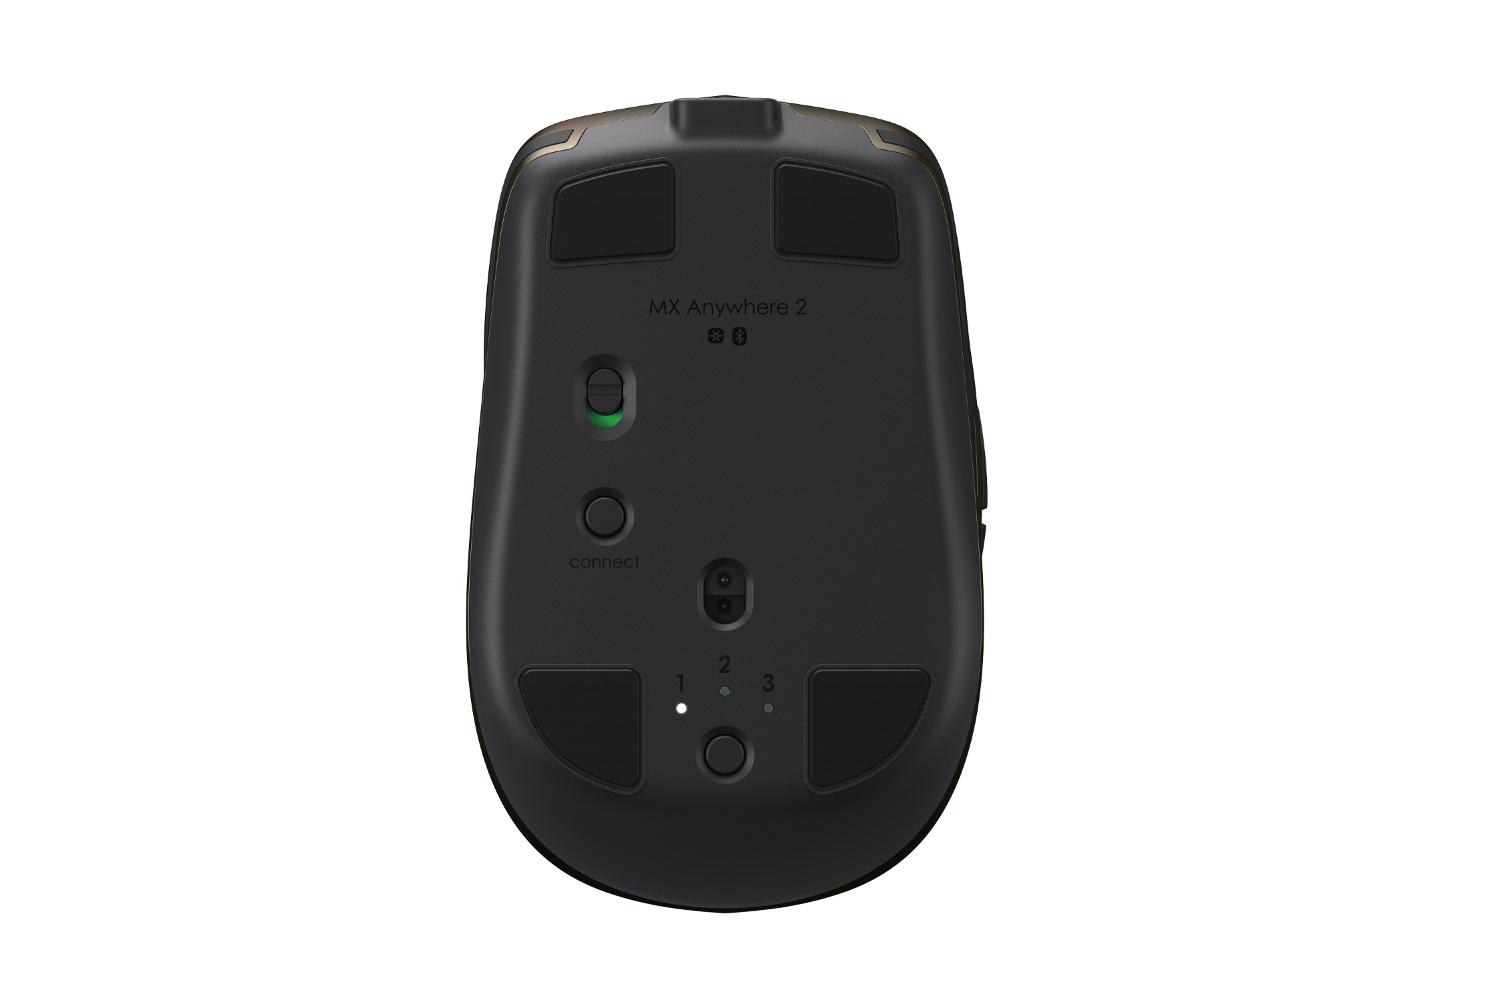 logitech introduces mx anywhere 2 wireless mobile mouse mxanywhere2 bottom